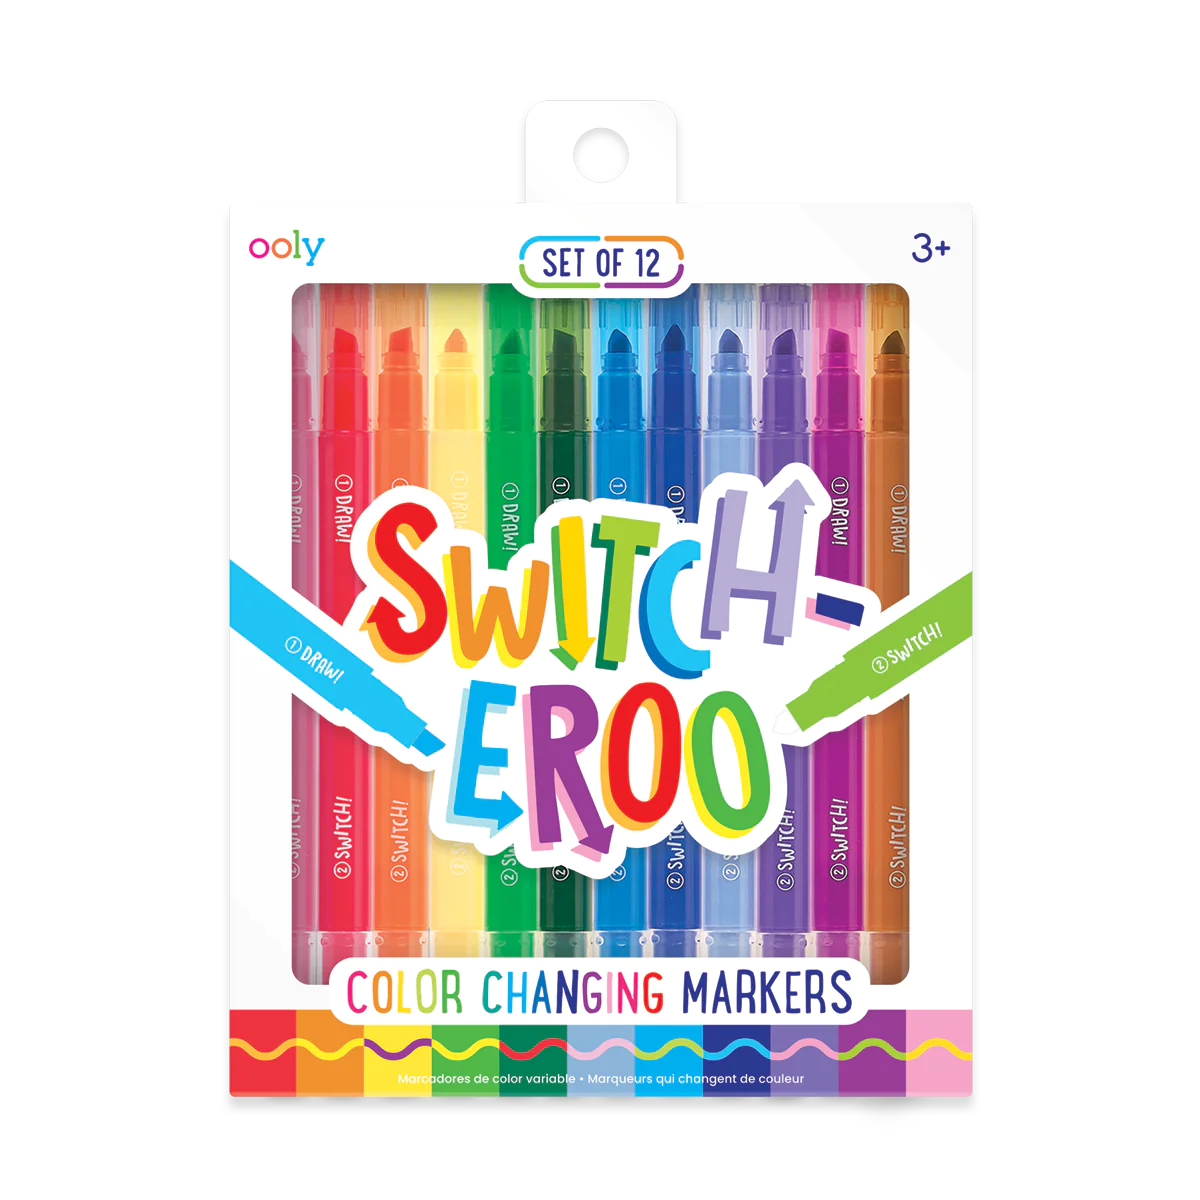 Switch-eroo! Color-Changing Markers